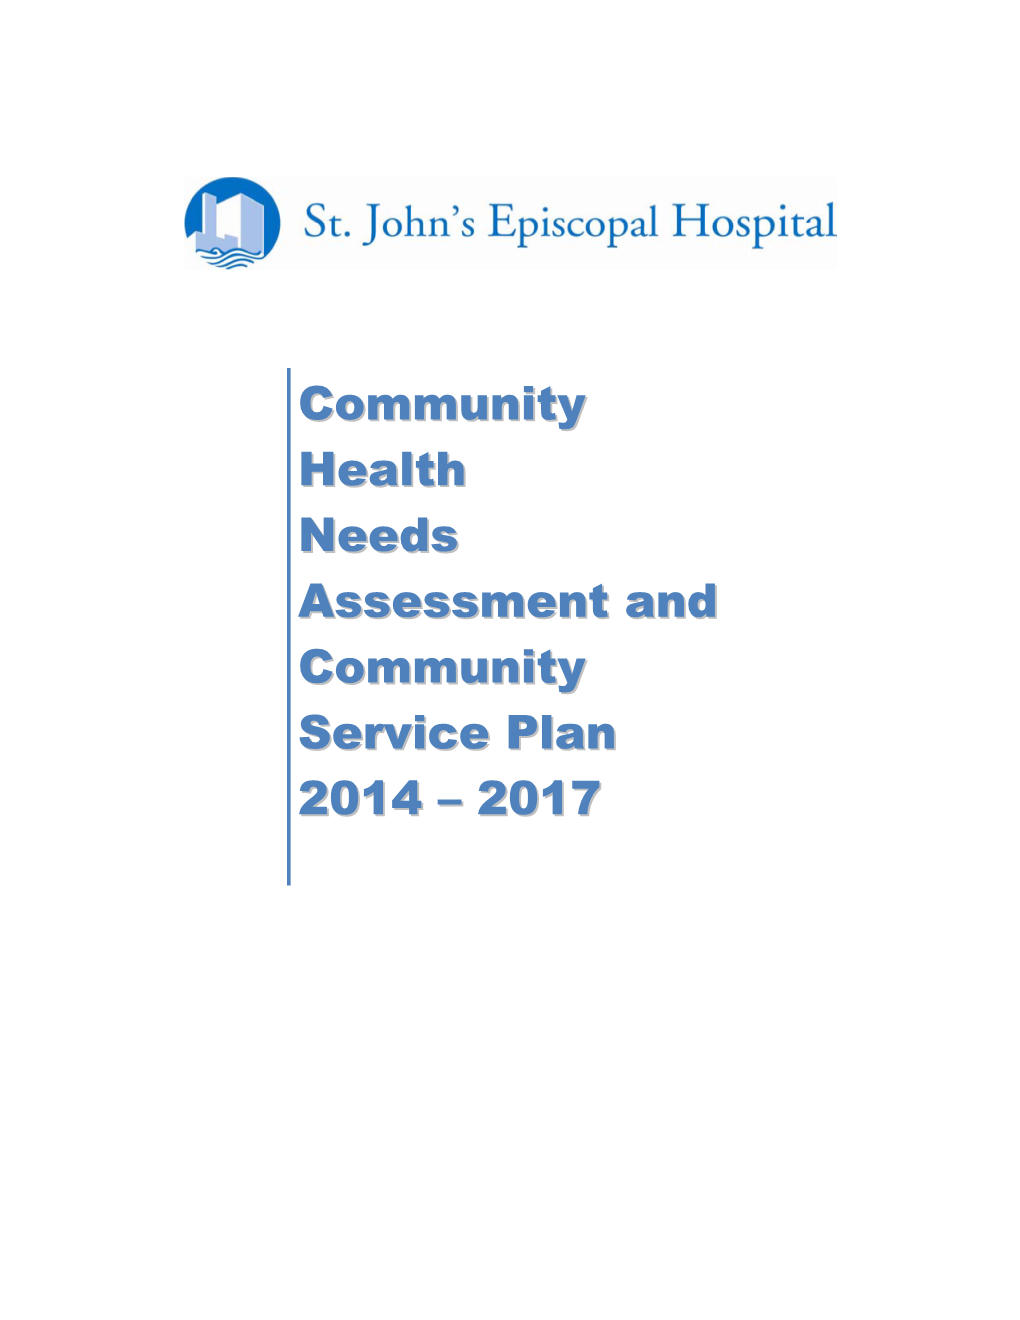 Community Health Needs Assessment And, Based on the Data; Gather Public Input on the Selection of Health Priorities for the Community